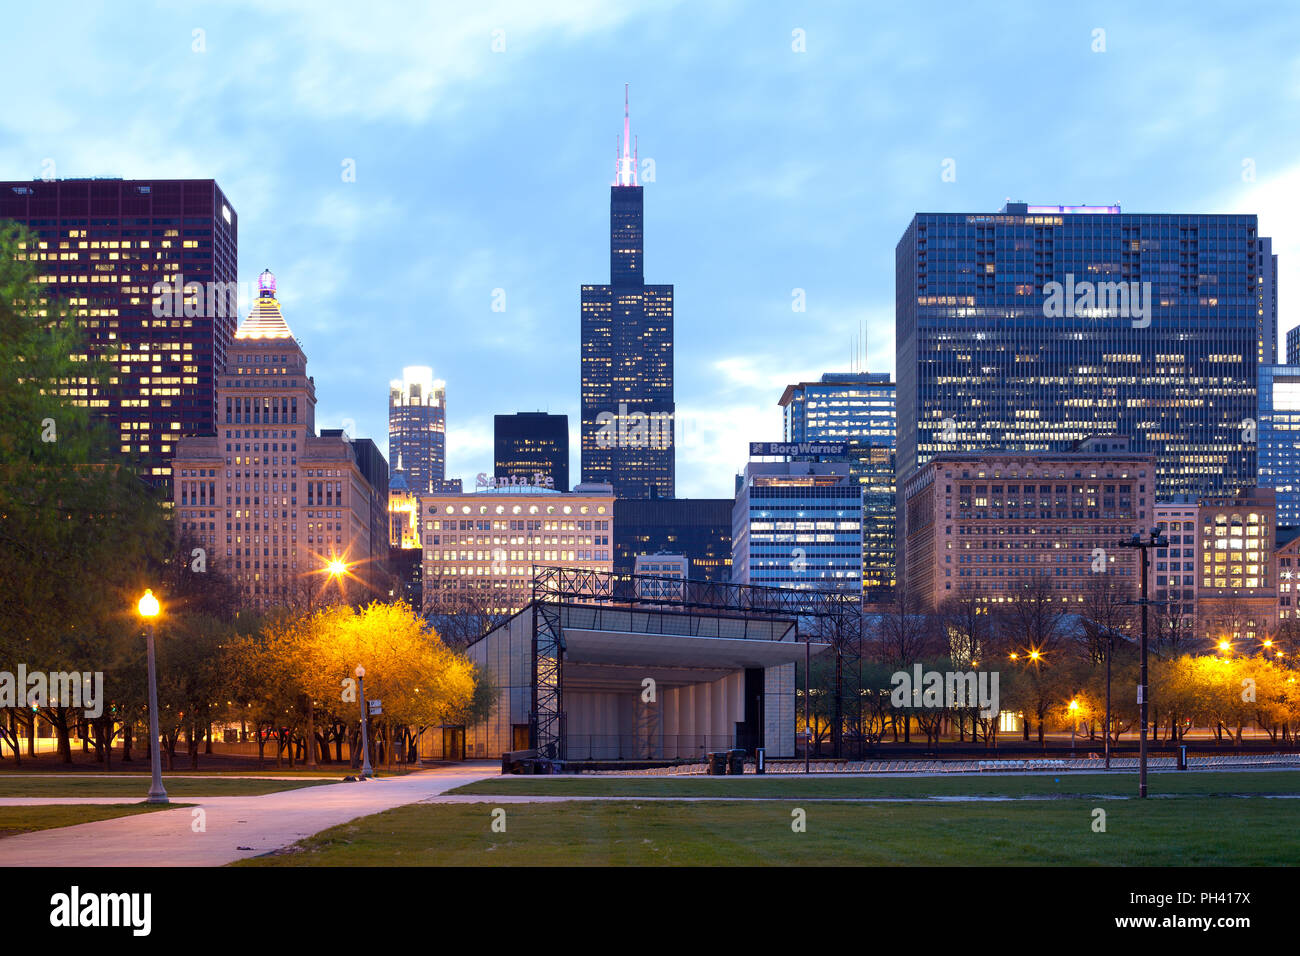 Skyline of buildings at The Loop with Willis Tower in Chicago. Stock Photo